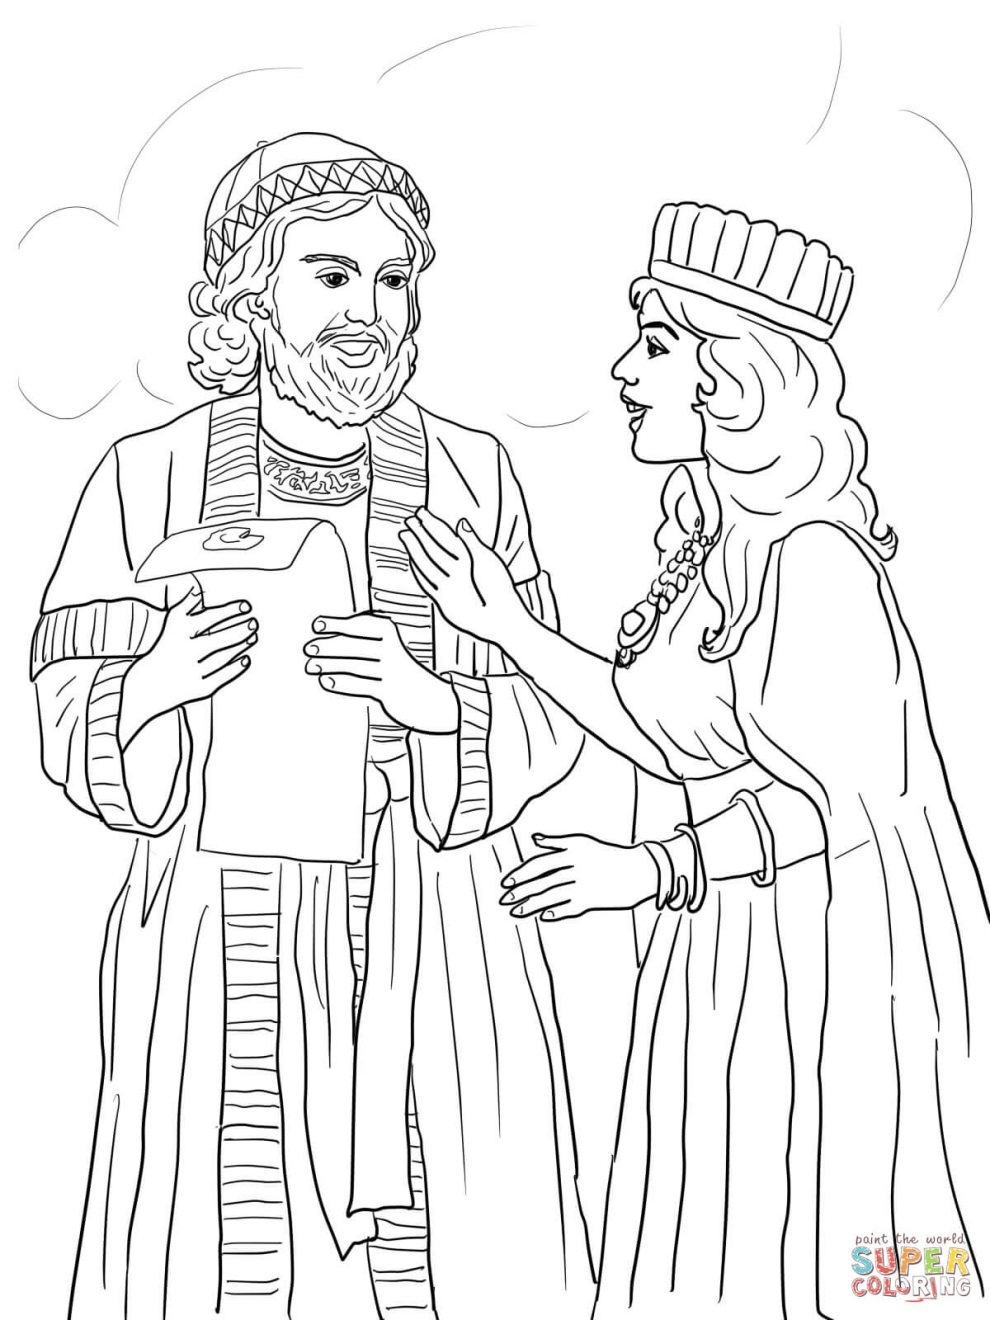 Queen Esther Coloring Pages Printable at GetColorings.com | Free